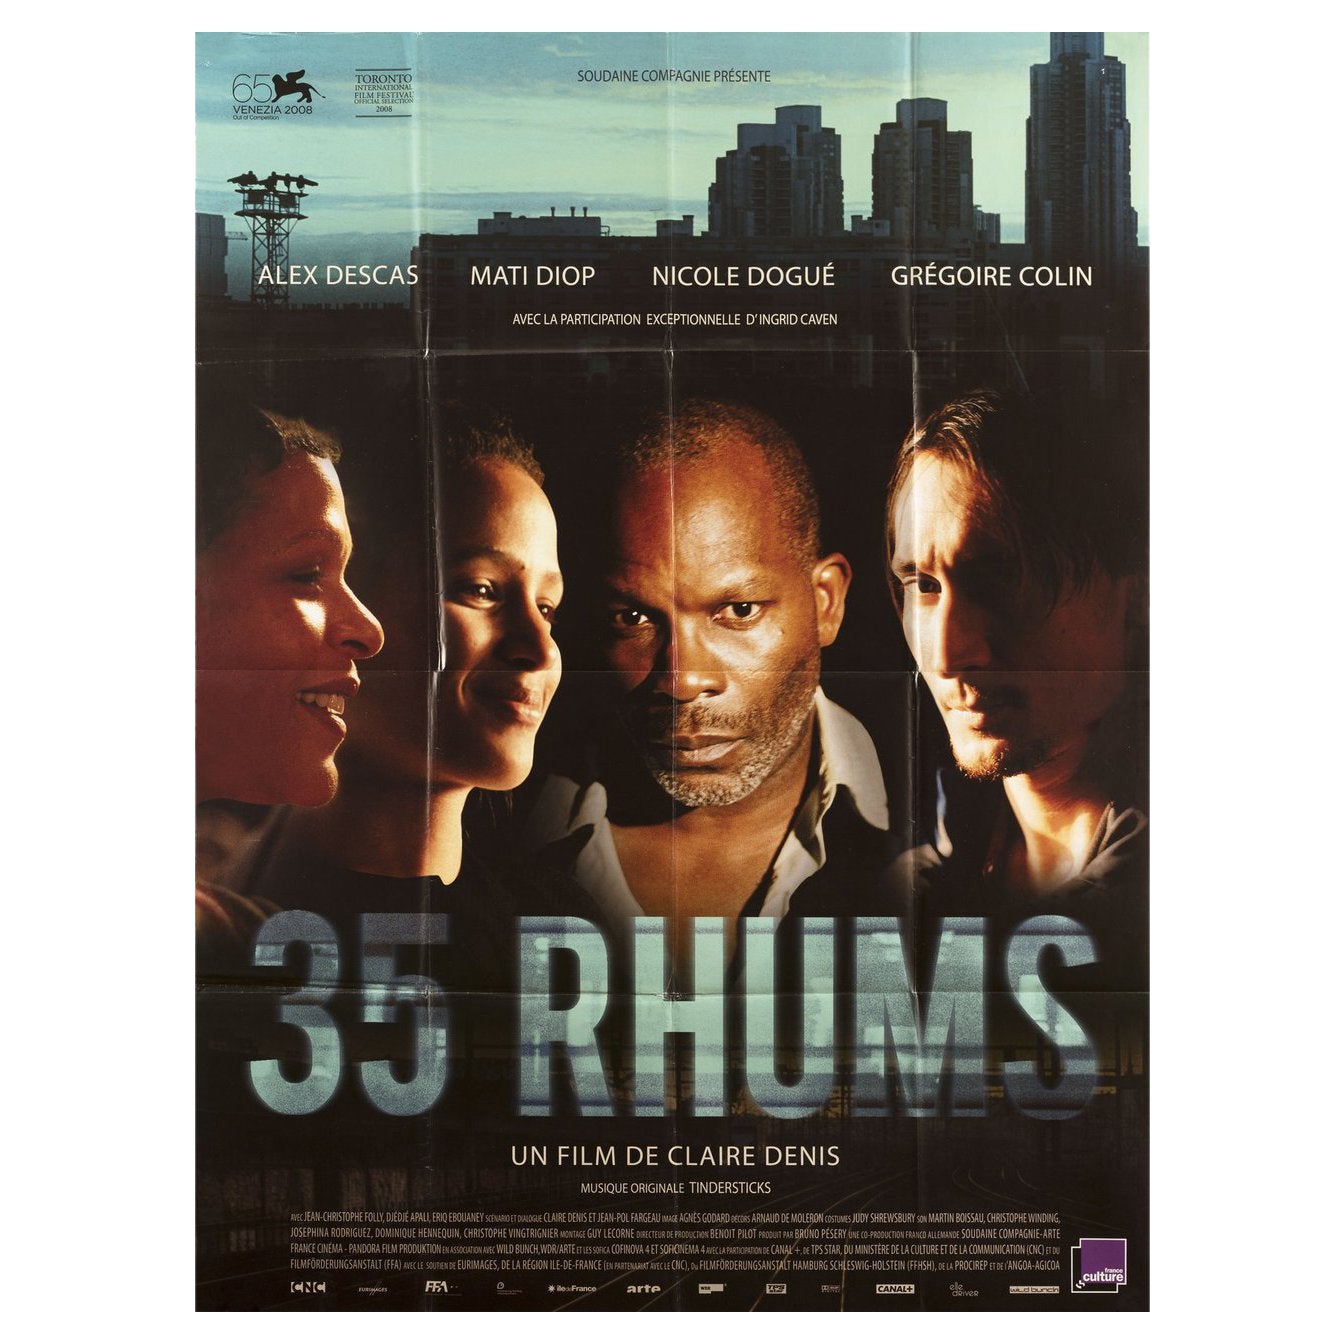 35 Shots of Rum 2008 French Grande Film Poster For Sale